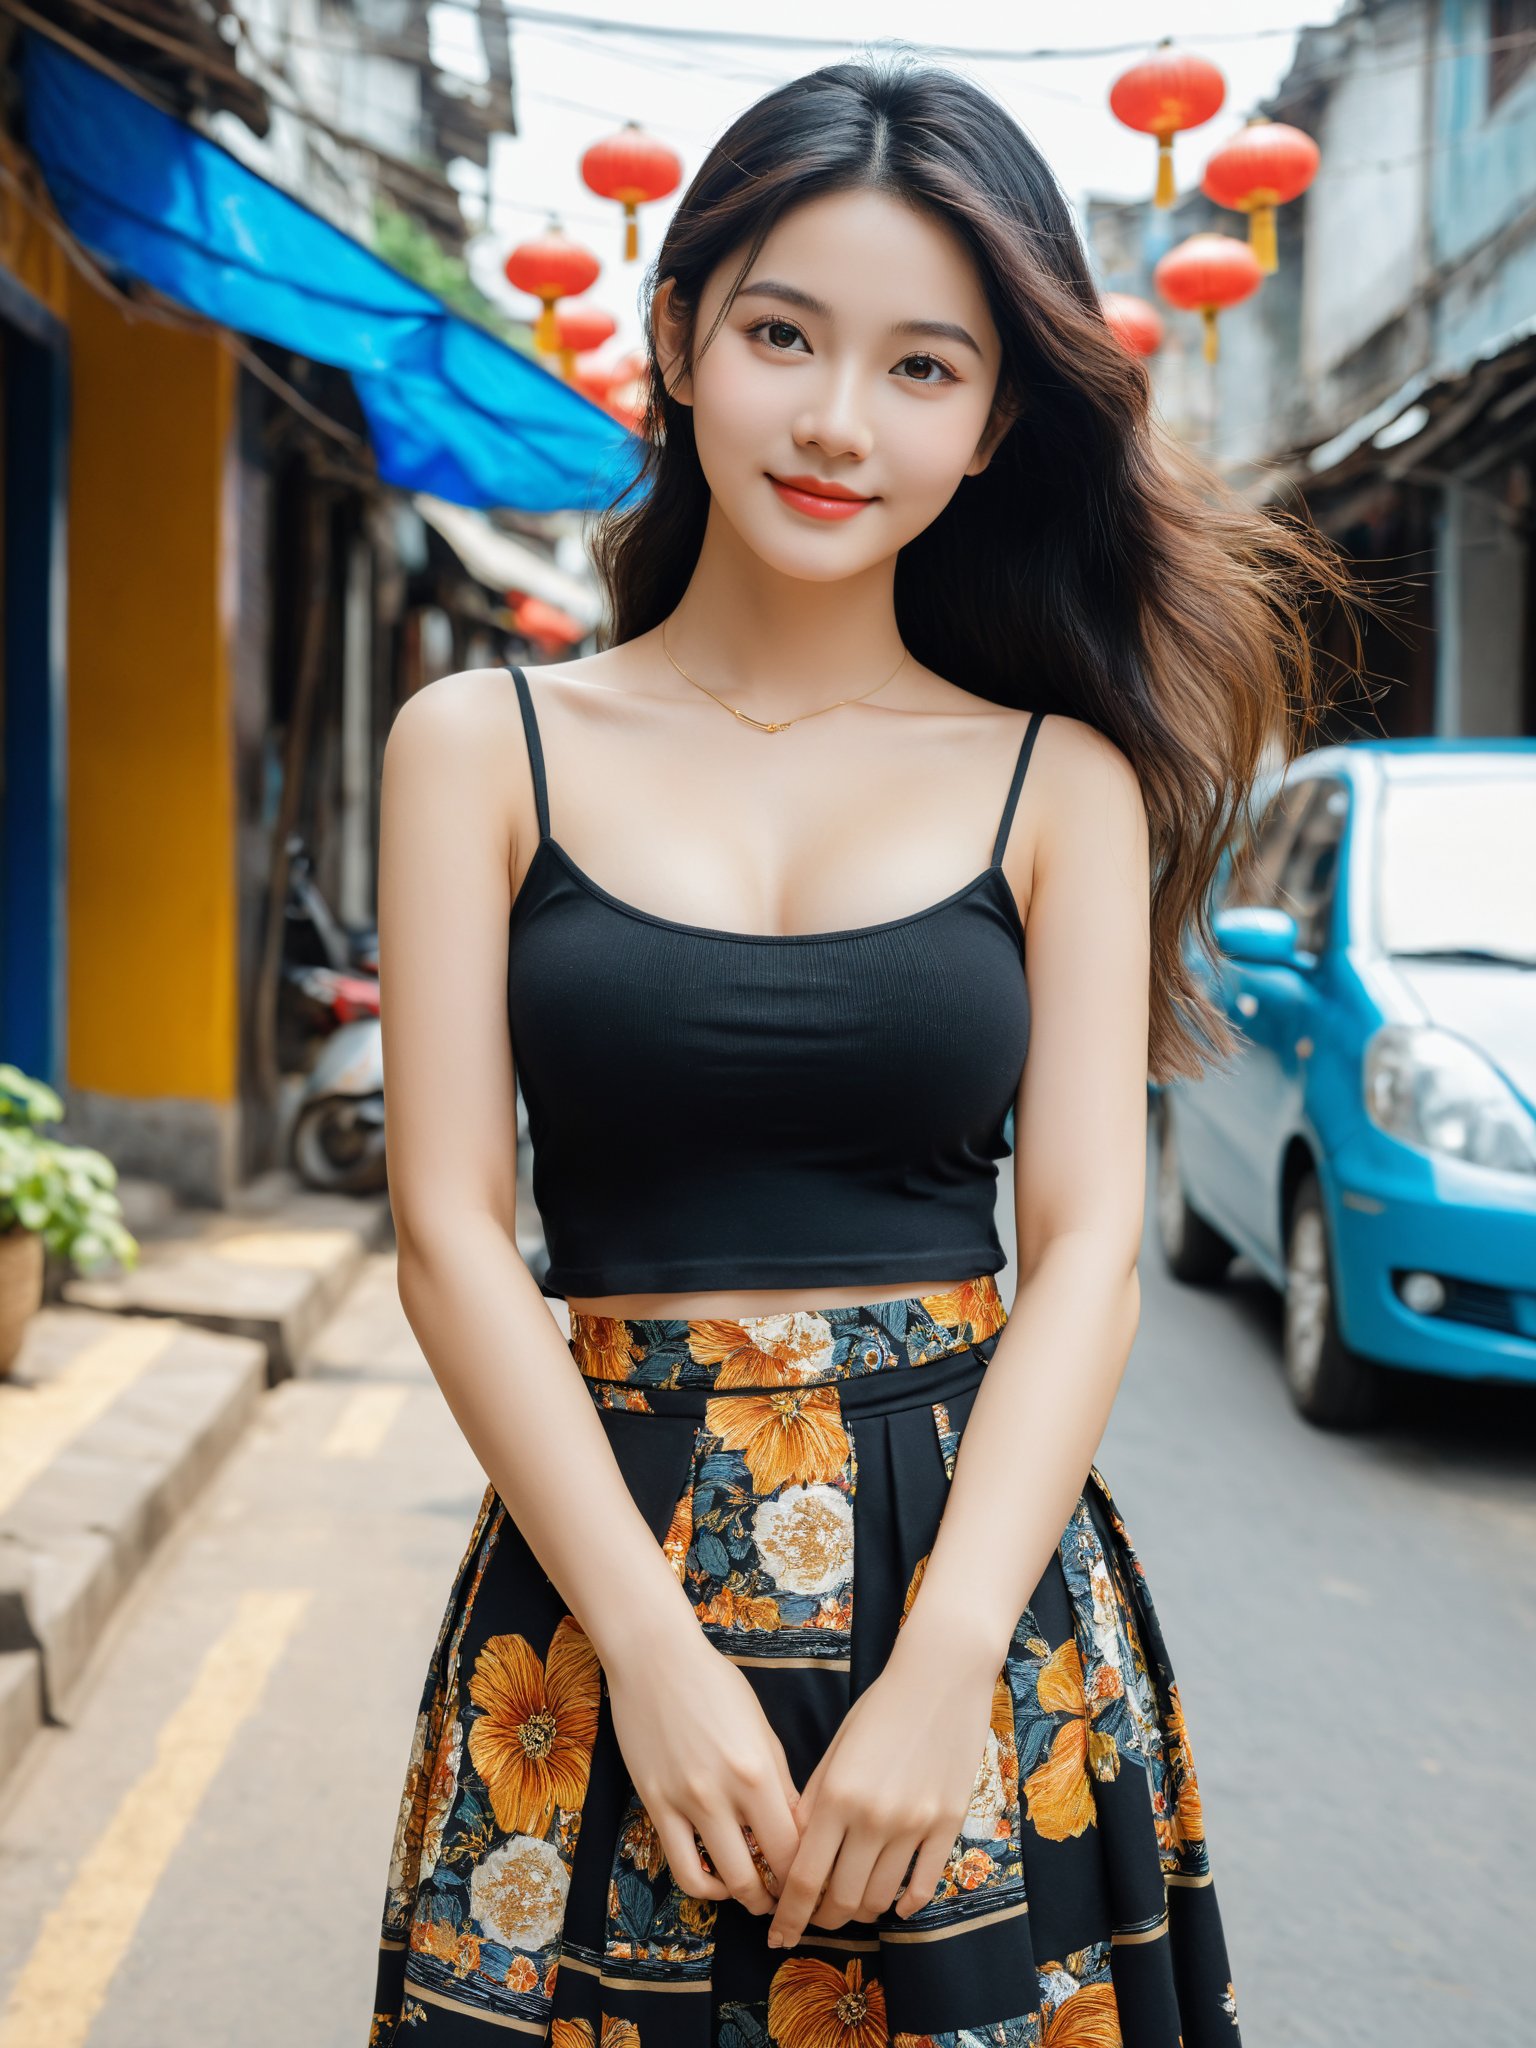 masterpiece, best quality, realistic, photo, real, incredibly_absurdres, Ultra HD,Affectionately looking at you,8K,UHD,in the vietnamese city street, full body, arms behind head,arms behind back , bust photo,The 20-year-old vietnamese girl,She has black hair, boho_chic maxi skirt with prints outfit, The lines of her face are soft and smooth. Her skin is as fair as snow, soft and delicate, and her eyes are bright and bright, deep and mysterious, making people feel endless charm and appeal. The eyebrows are slender and graceful, the nose is straight and noble, the lips are rosy and seductive, and the slightly raised angle reveals confidence and elegance. Her facial features are delicate and three-dimensional, with well-defined contours, like a fine painting or a finely carved work of art. The overall feeling is gentle, elegant, noble and full of charm, huge_filesize, bust, girl, kawaii, adorable girl, bishoujo, ojousama, idol, wavy hair, long hair, black hair, beautiful detailed eyes, looking at viewer, seductive smile, black eyes, large breasts, arms behind back ,